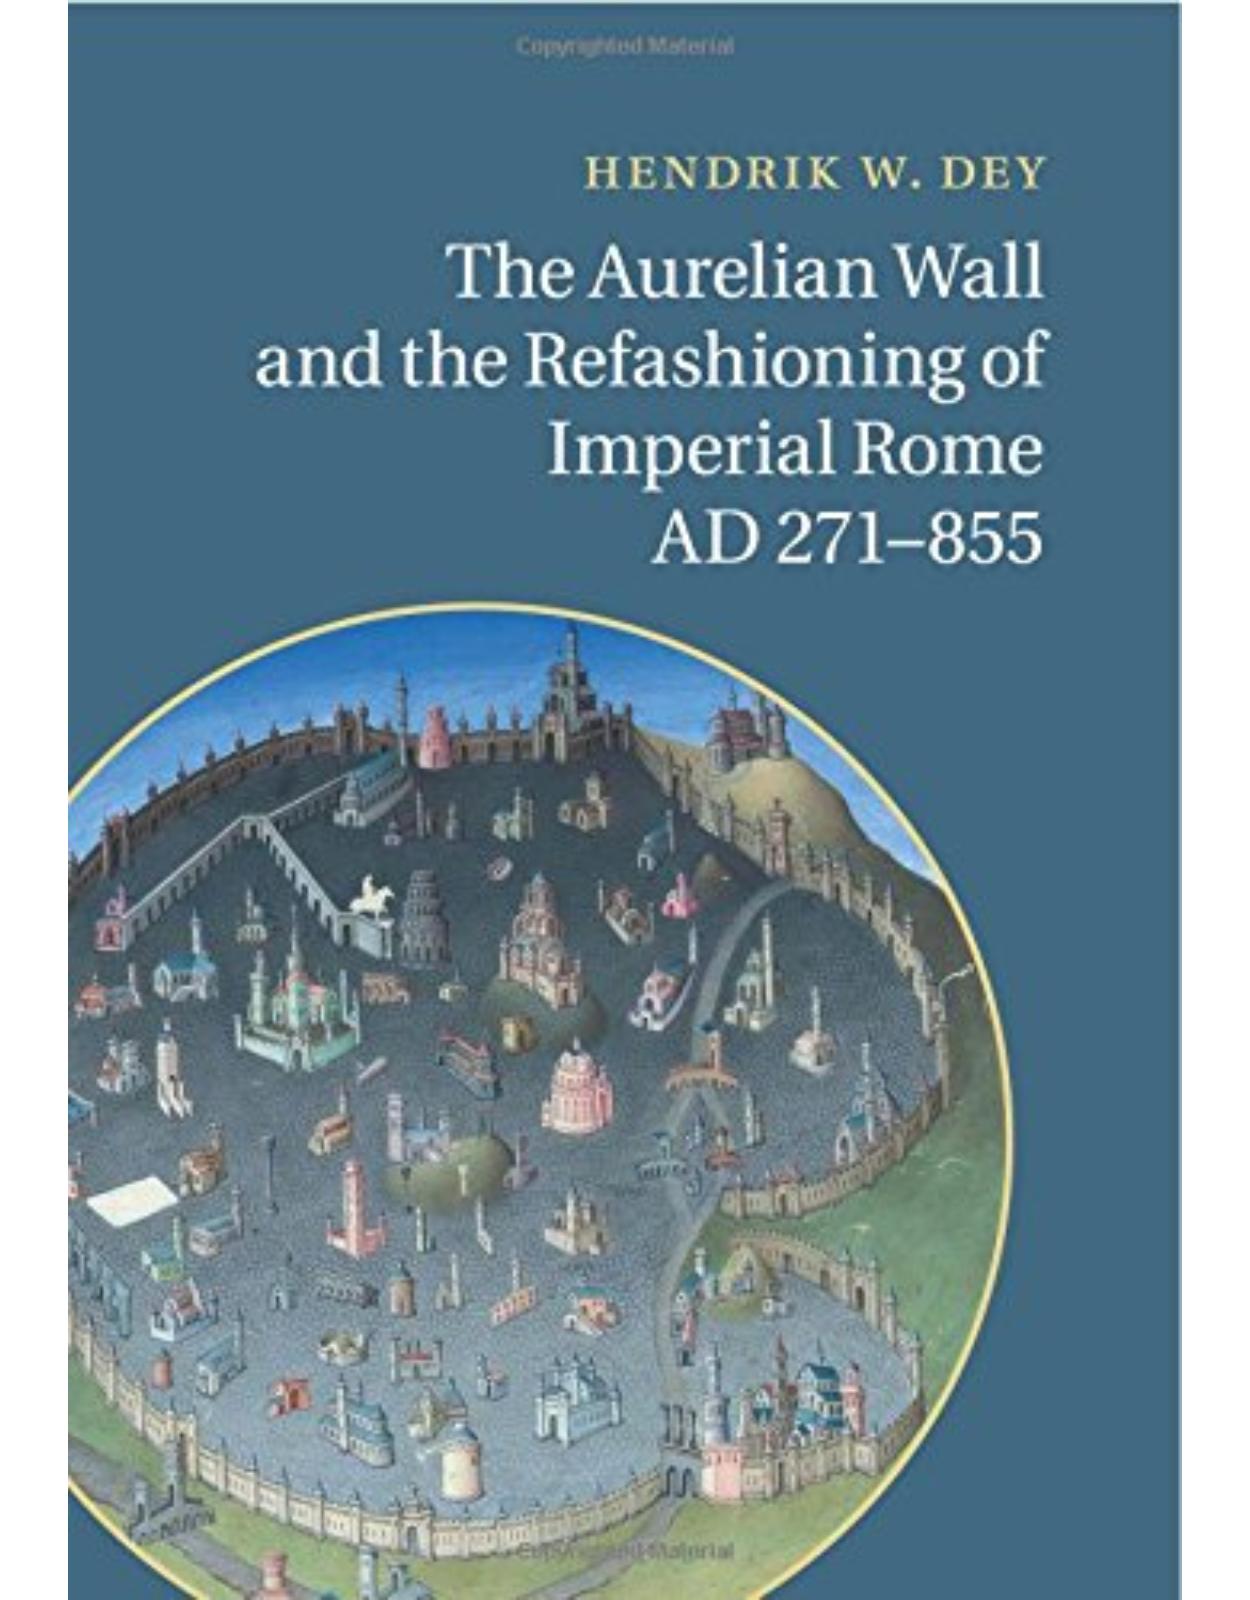 The Aurelian Wall and the Refashioning of Imperial Rome, AD 271-855 